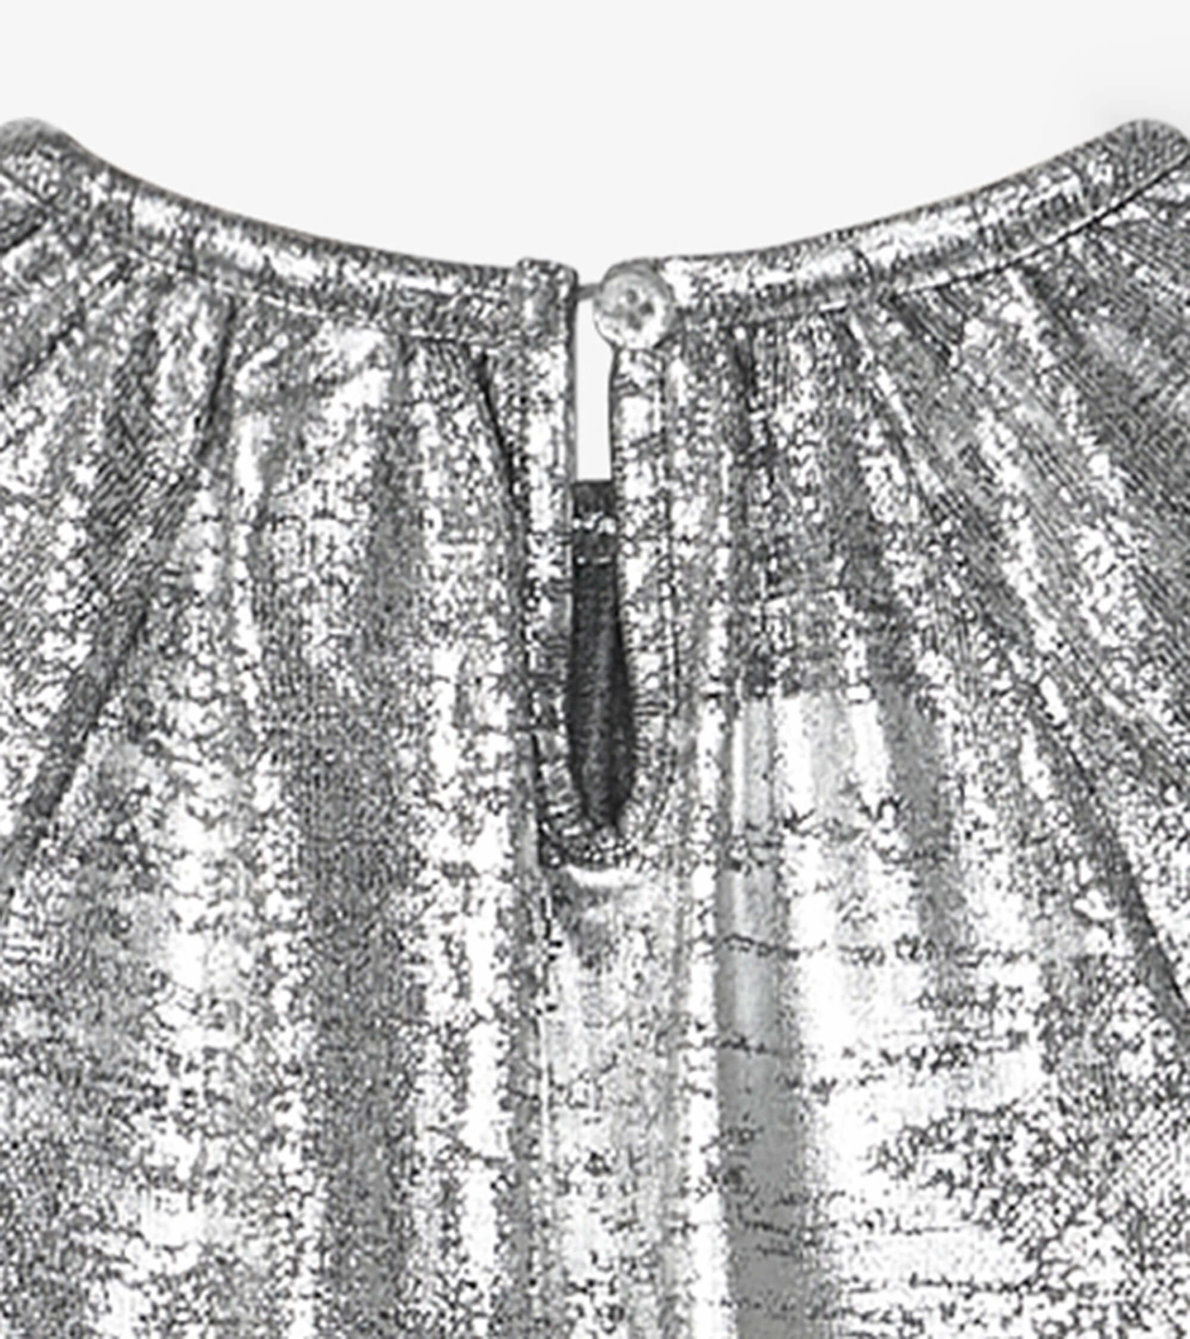 View larger image of Girls Silver Shimmer A-Line Dress